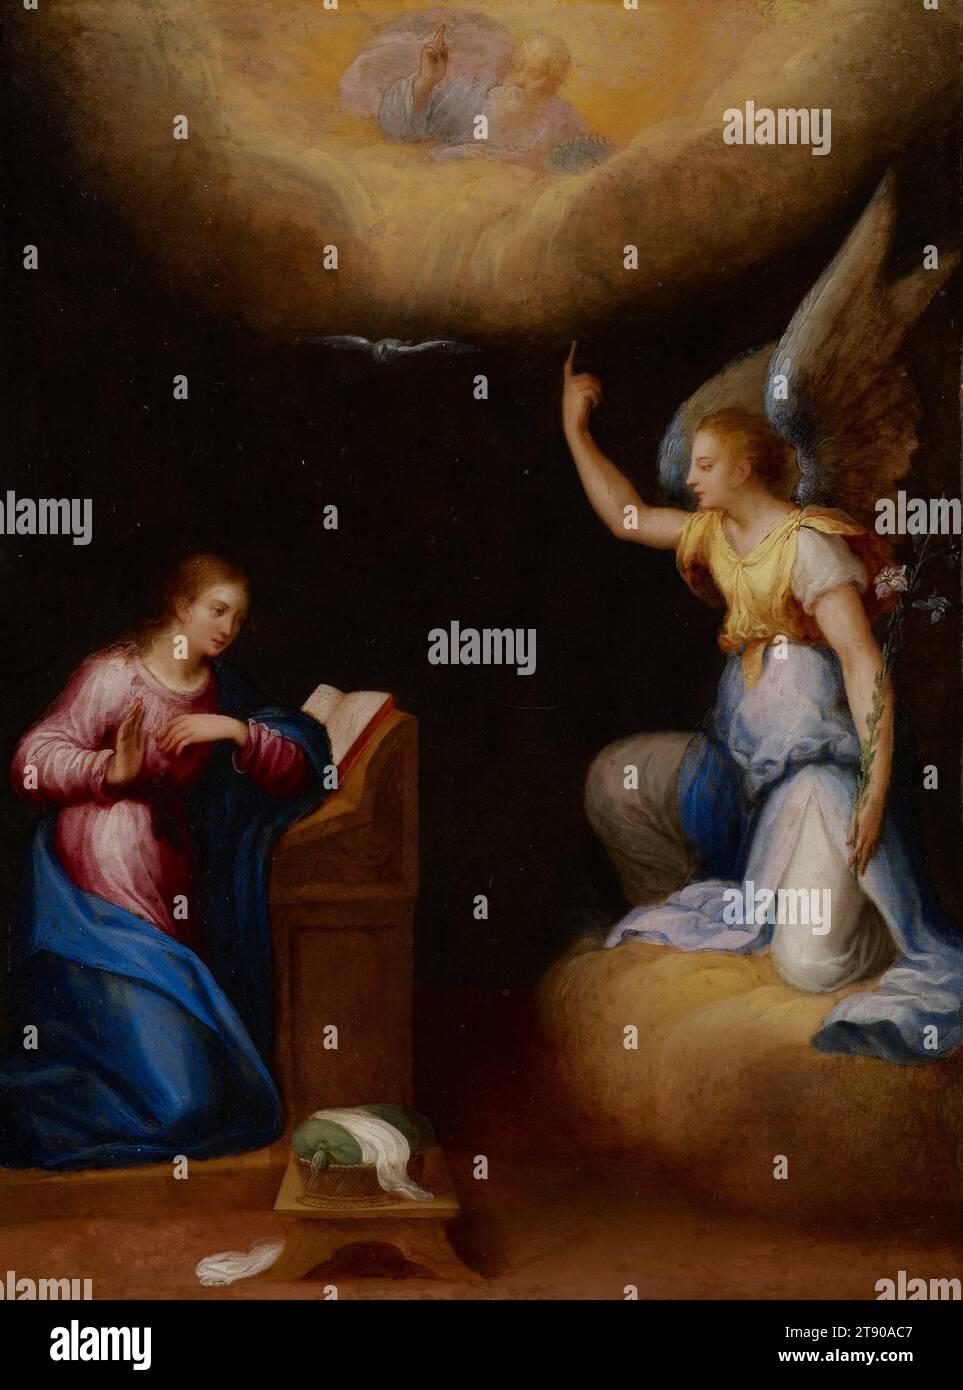 Annunciation, c. 1610-1615, Hans (or Johann) Rottenhammer I, German, 1564-1625, 9 1/4 x 7 in. (23.5 x 17.78 cm)14 1/2 x 12 1/8 in. (36.83 x 30.8 cm) (outer frame), Oil on copper, Germany, 17th century, Rottenhammer was born in Munich. By 1591 he had made his way to Rome, where he became quite successful at painting devotional and allegorical images on copper, often in collaboration with the Flemish landscape painters Jan Breughel I (1568-1625) and Paul Bril (1554-1626). In 1596 he settled in Venice for a decade, and by 1606, he was permanently residing in Augsburg Stock Photo